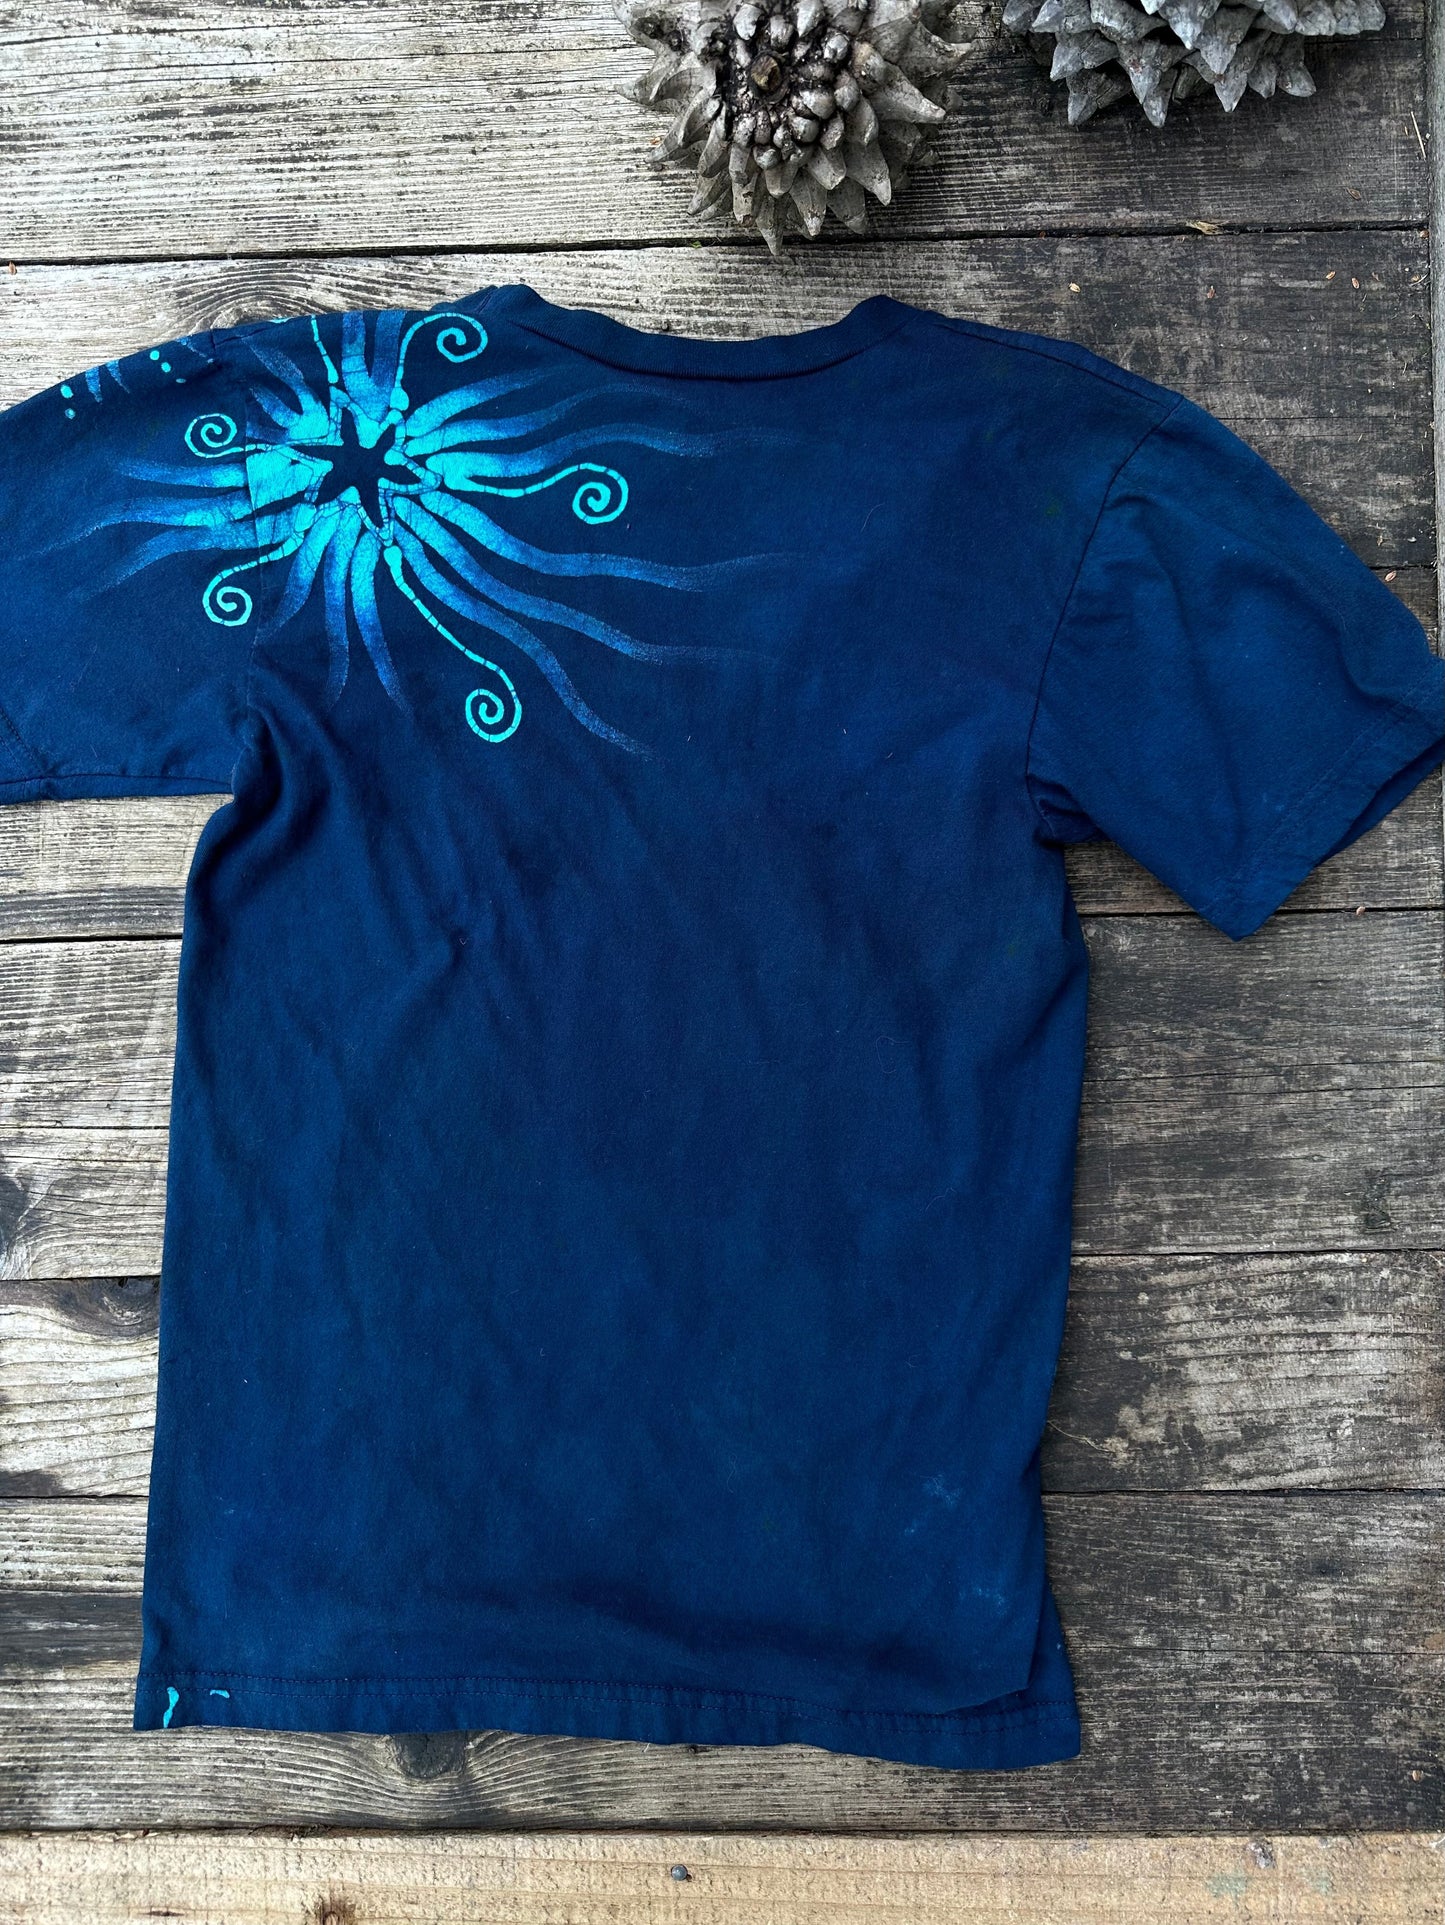 The Stars Will Guide Us Vneck Tee in Blue Teal - Size XS Unisex Tshirts Batikwalla by Victoria 